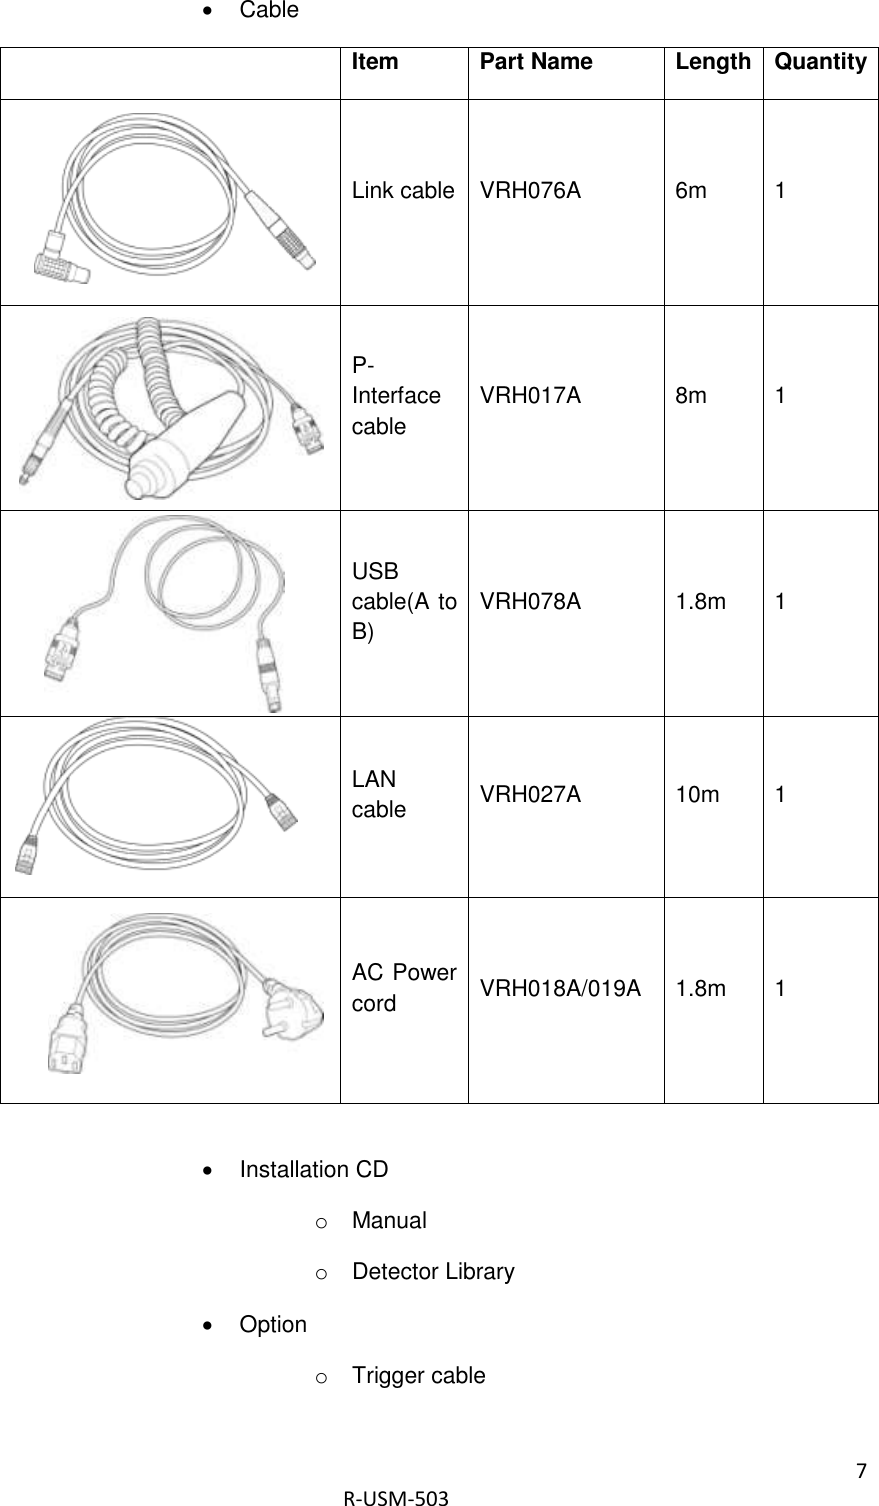 7  R-USM-503     Cable  Item Part Name Length Quantity       Link cable VRH076A 6m 1       P-Interface cable VRH017A 8m 1     USB cable(A to B) VRH078A 1.8m 1  LAN cable VRH027A 10m 1     AC Power cord VRH018A/019A 1.8m 1    Installation CD o  Manual o  Detector Library   Option o  Trigger cable 